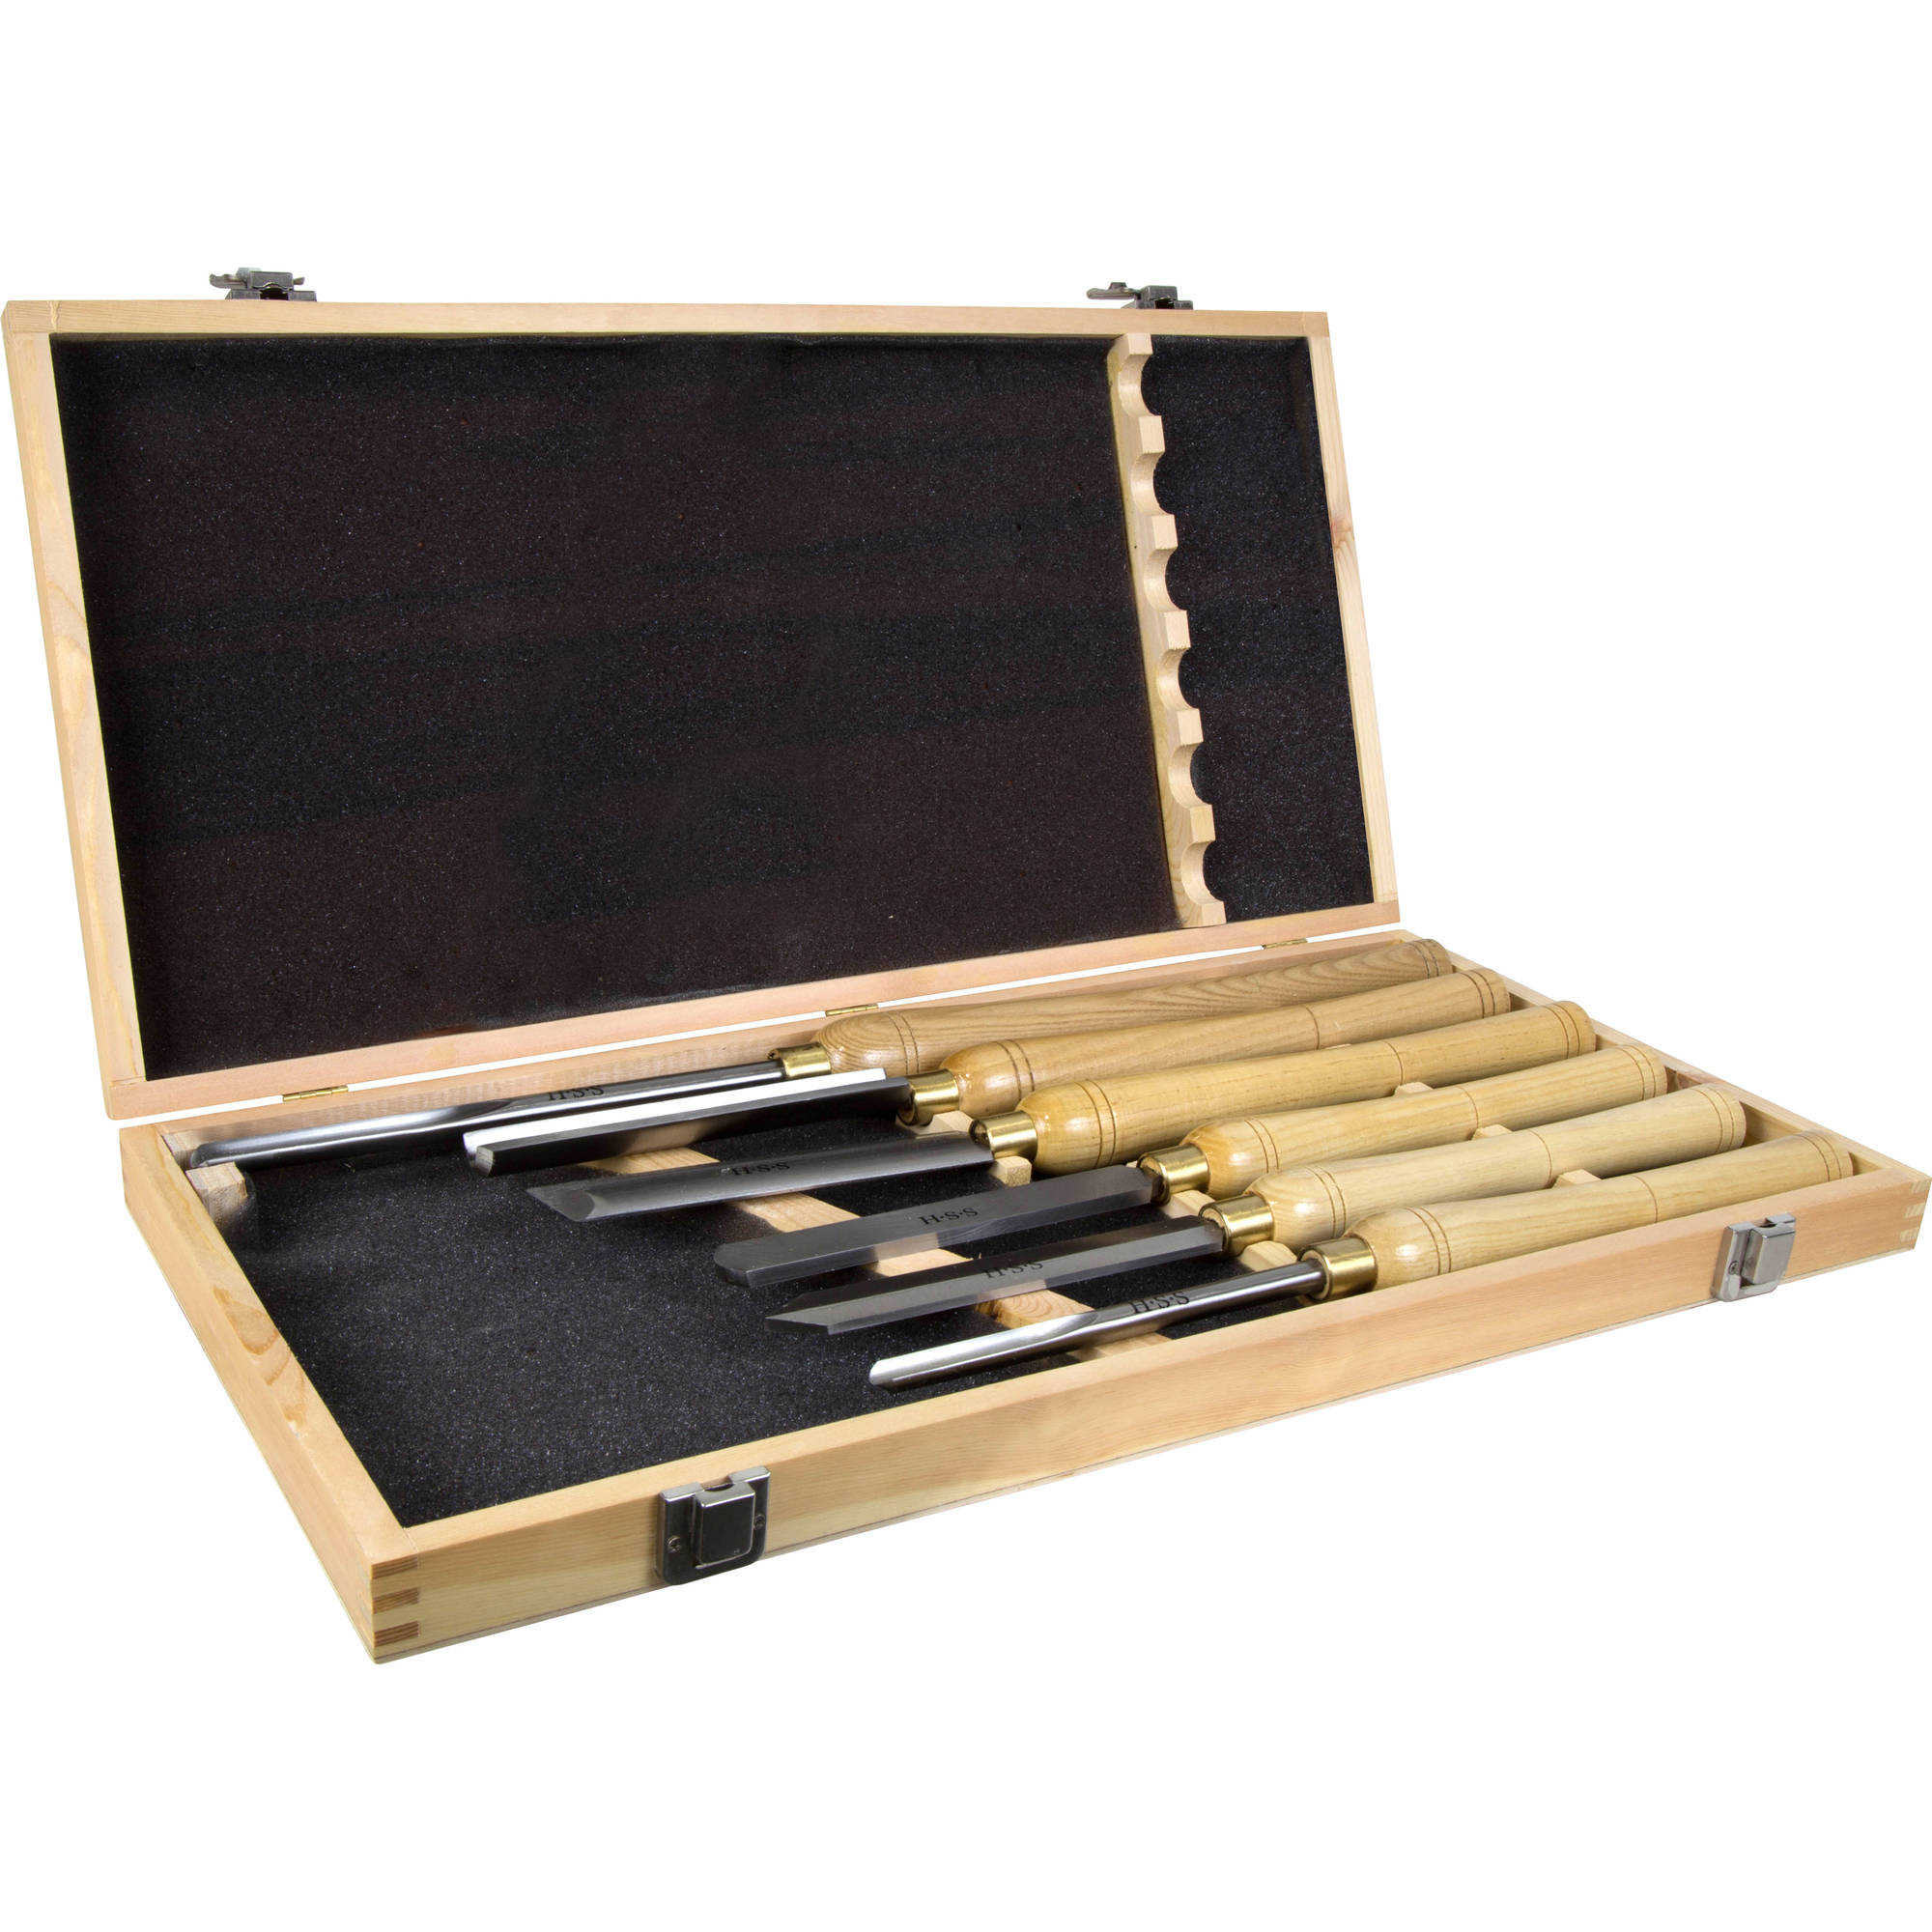 WEN 6-Piece 16-to-22' Artisan Chisel Set with High-Speed Steel Blades and Domestic Ash Handles